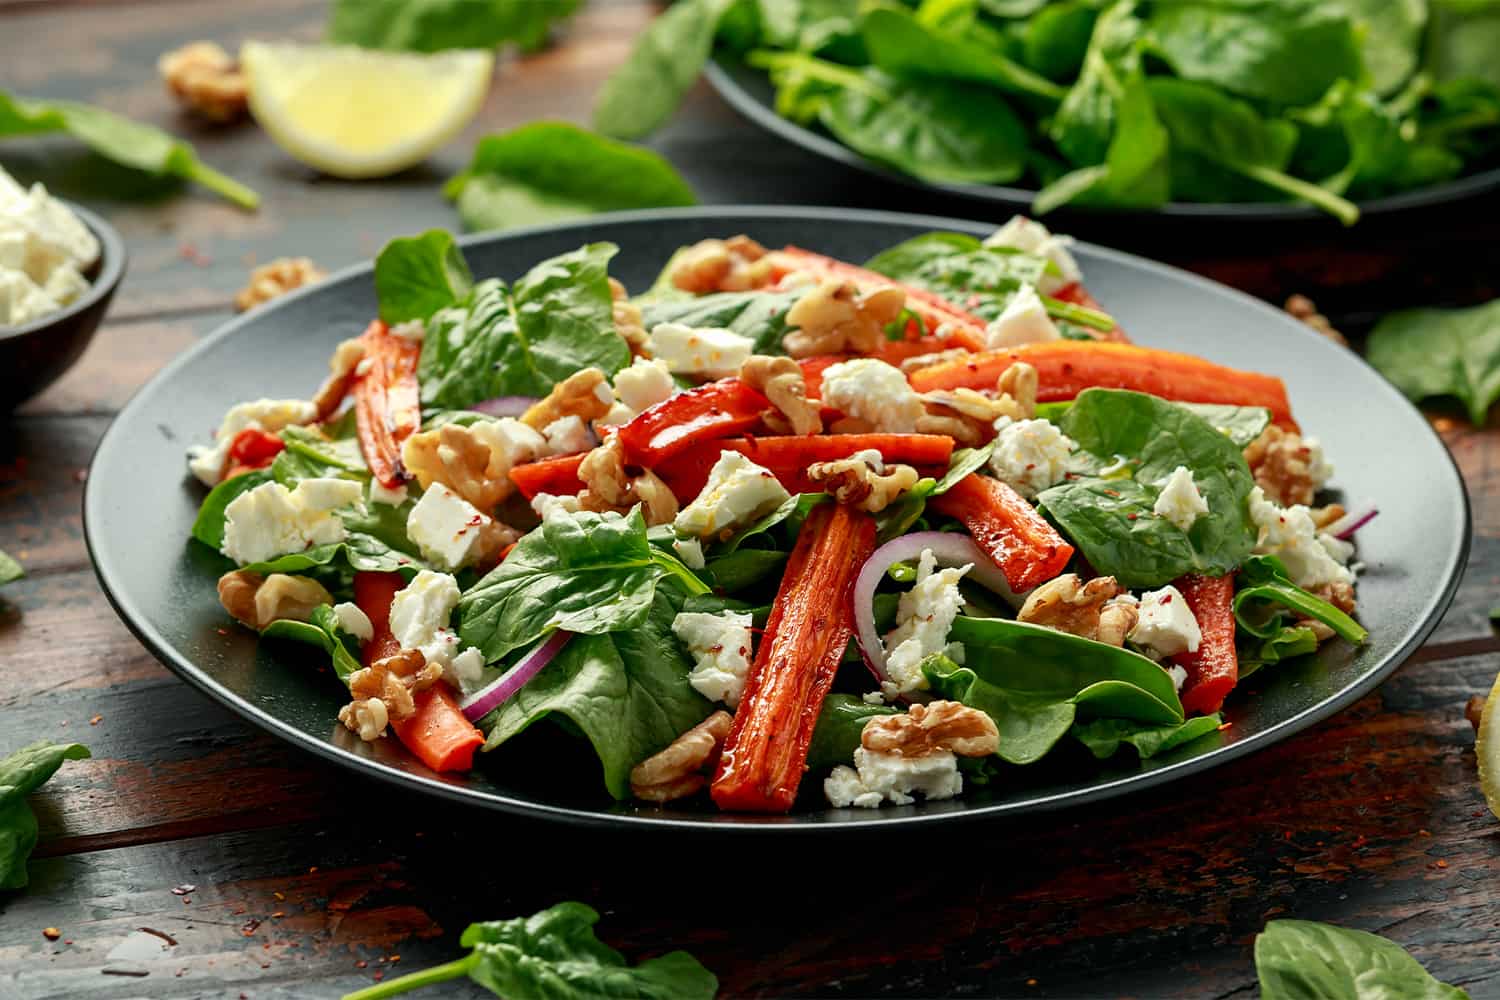 Roasted Carrot Salad with Spinach, Feta Cheese and Walnuts